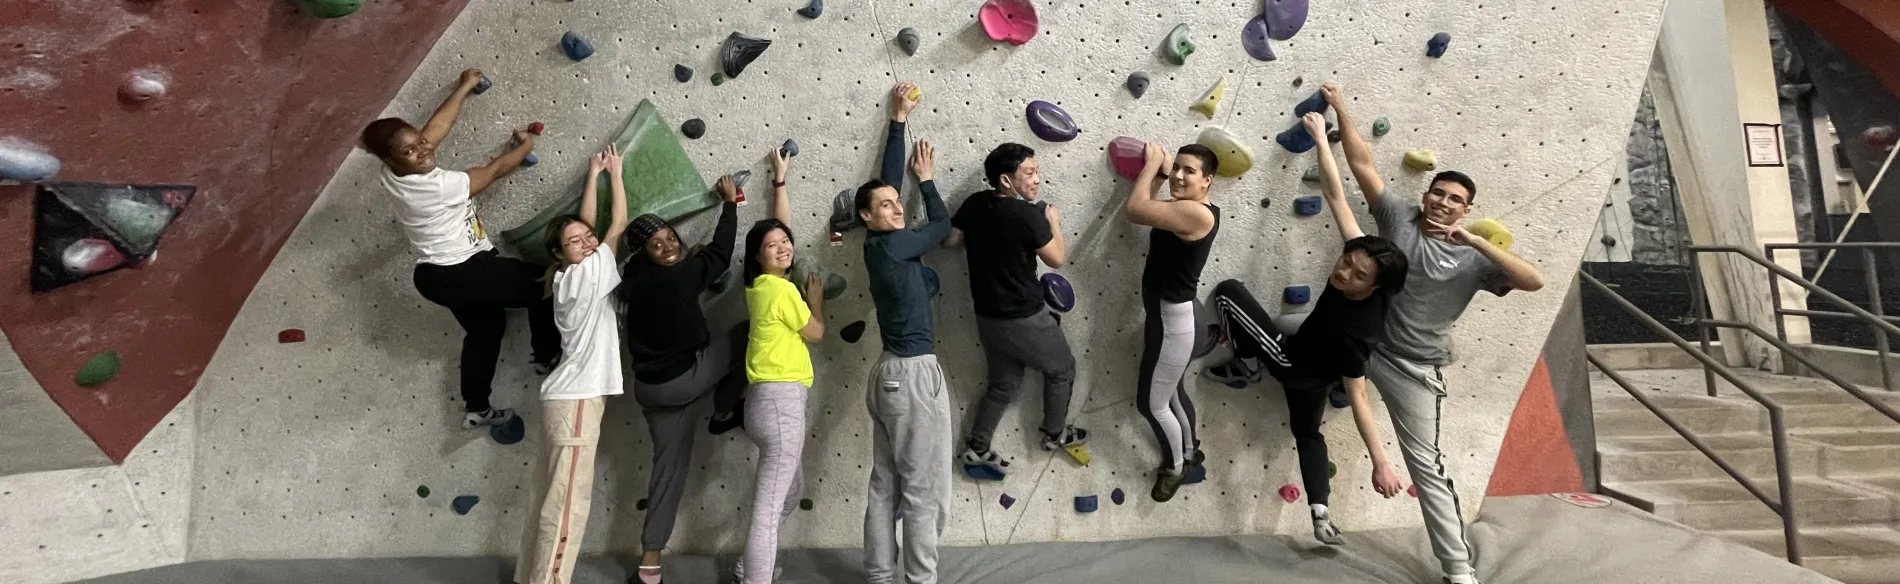 group photo in front of rock climbing wall